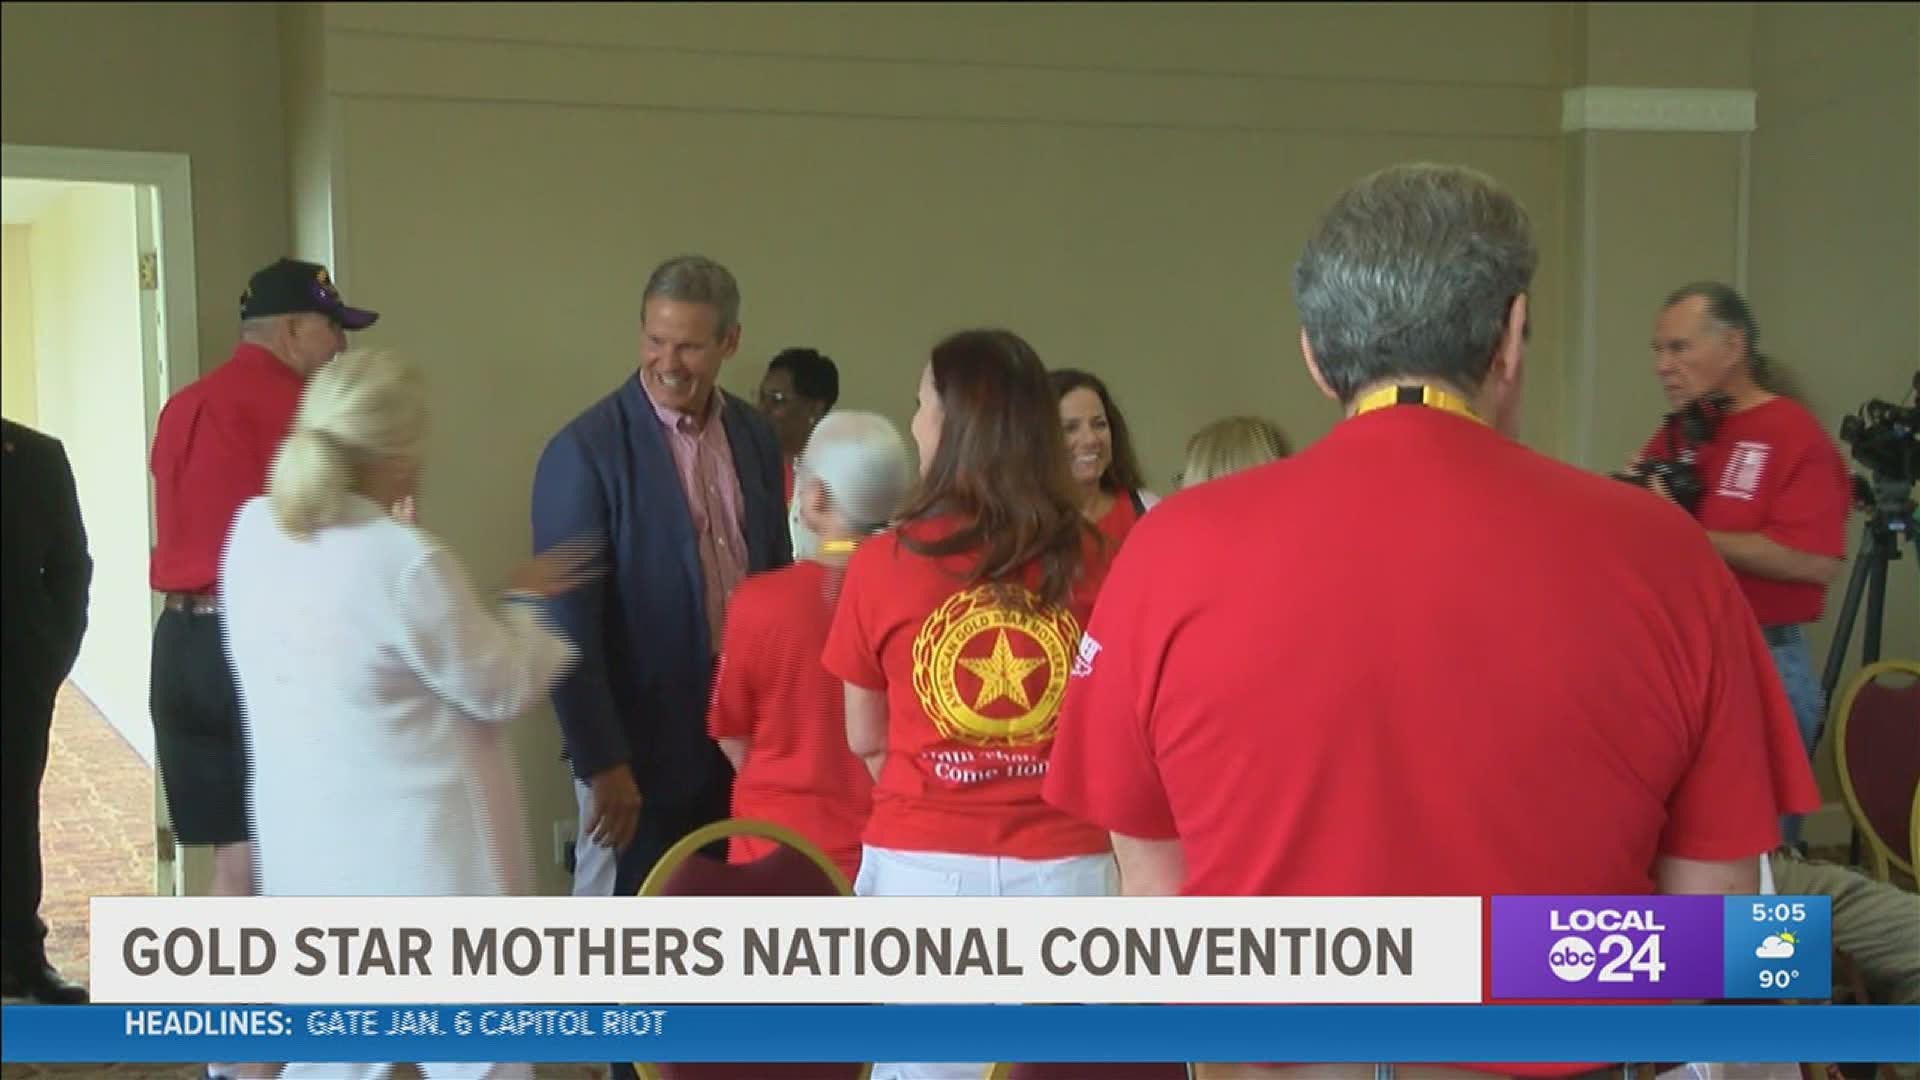 The convention is being held this weekend at the Holiday Inn in downtown Memphis.